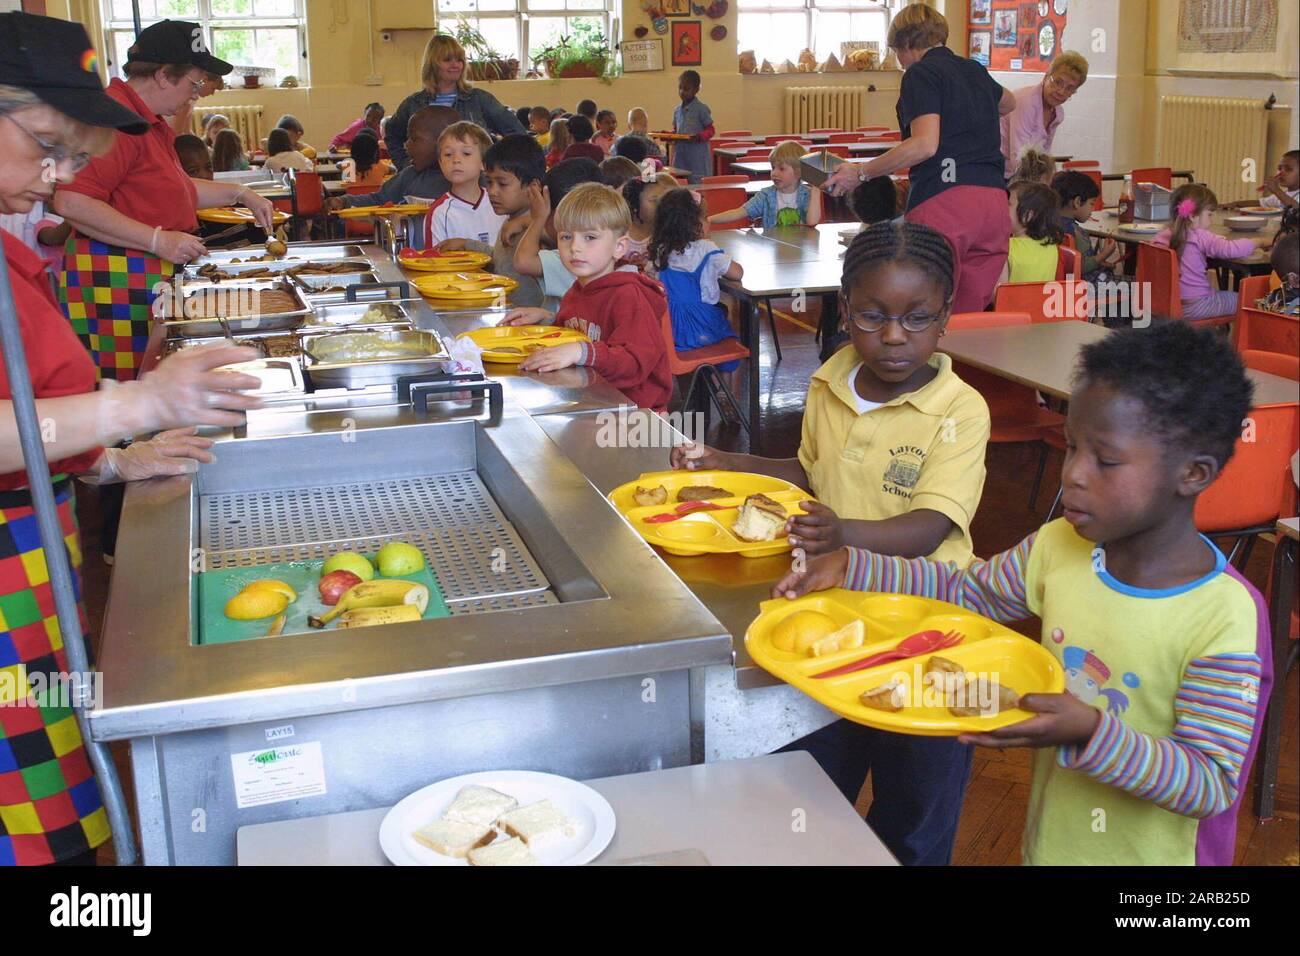 https://c8.alamy.com/comp/2ARB25D/children-in-village-school-canteen-being-served-cooked-meal-2ARB25D.jpg